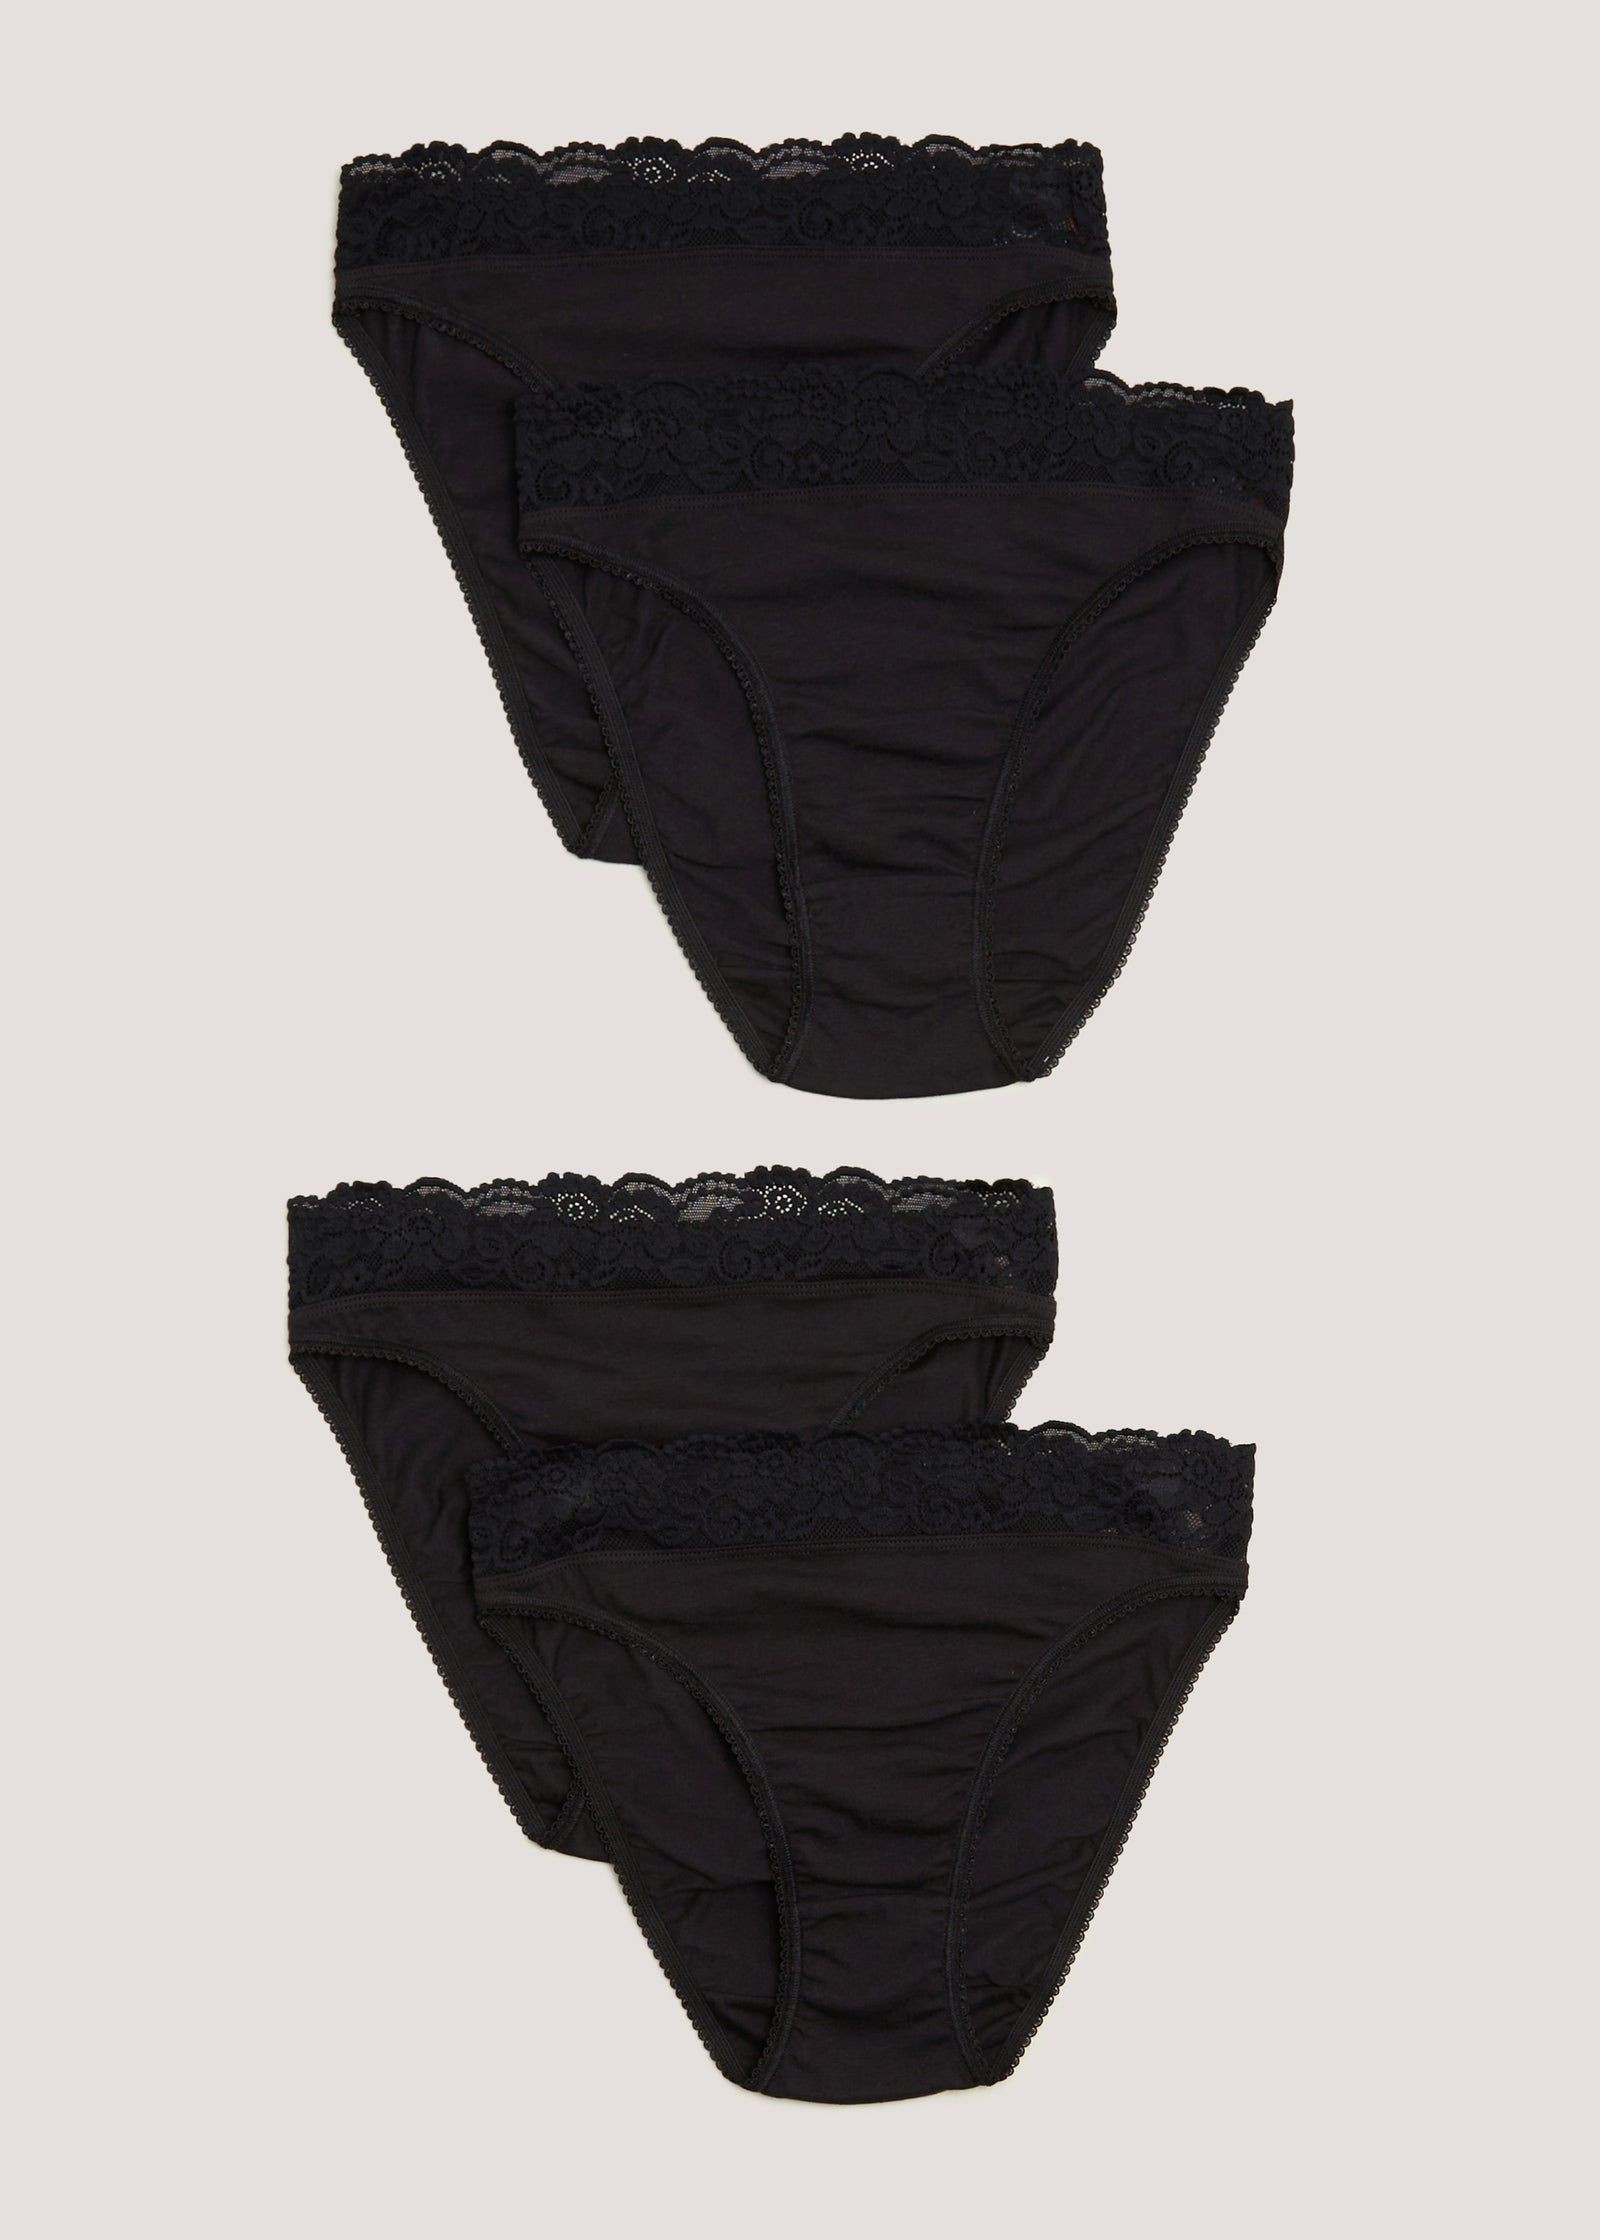 Buy 4 Pack Black Lace Trim High Leg Knickers Online in UAE from Matalan